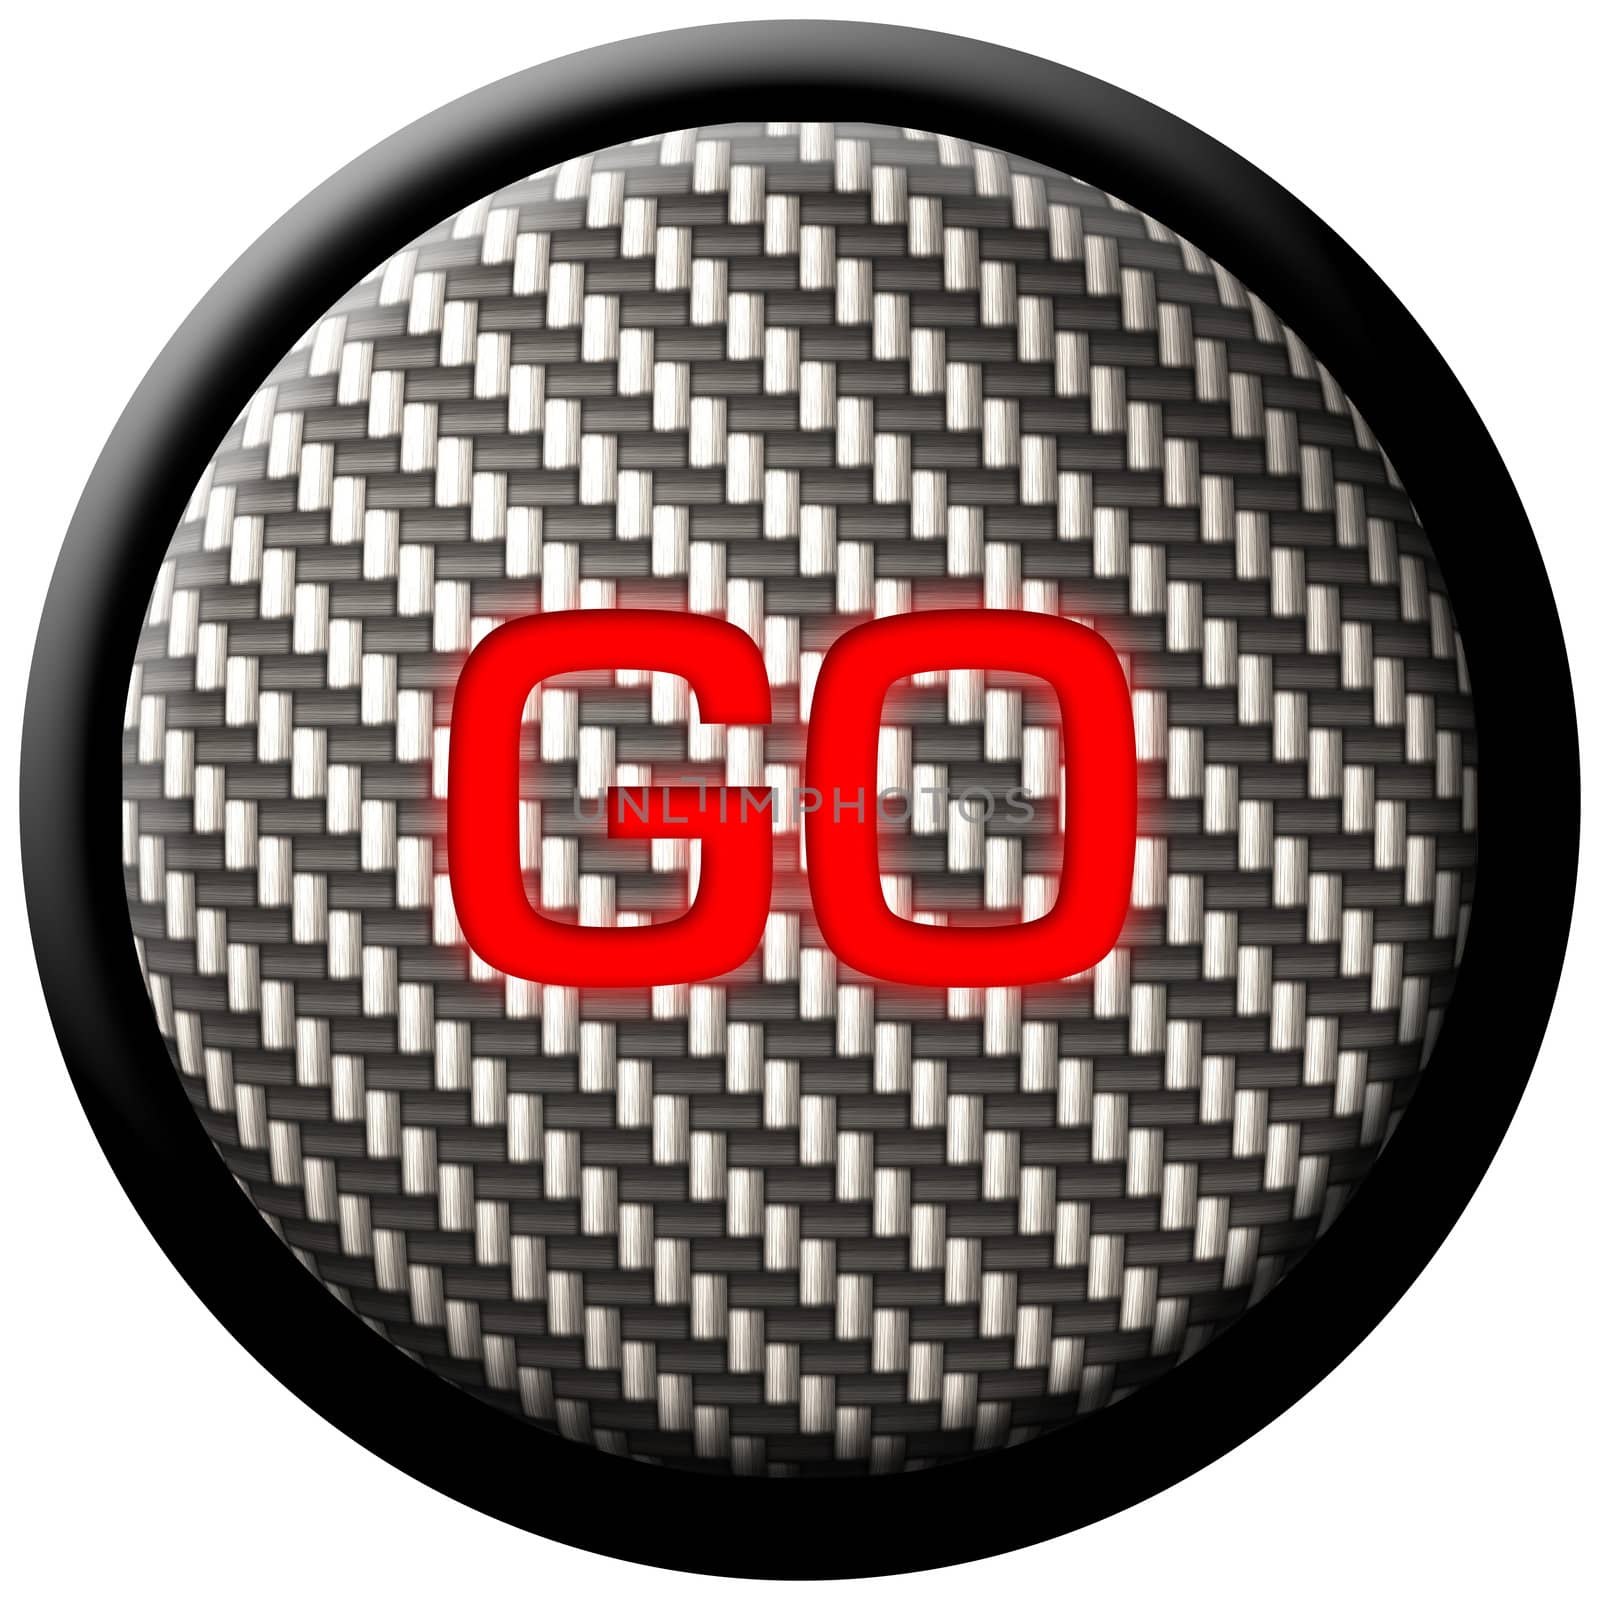 Carbon Fiber GO Button by graficallyminded